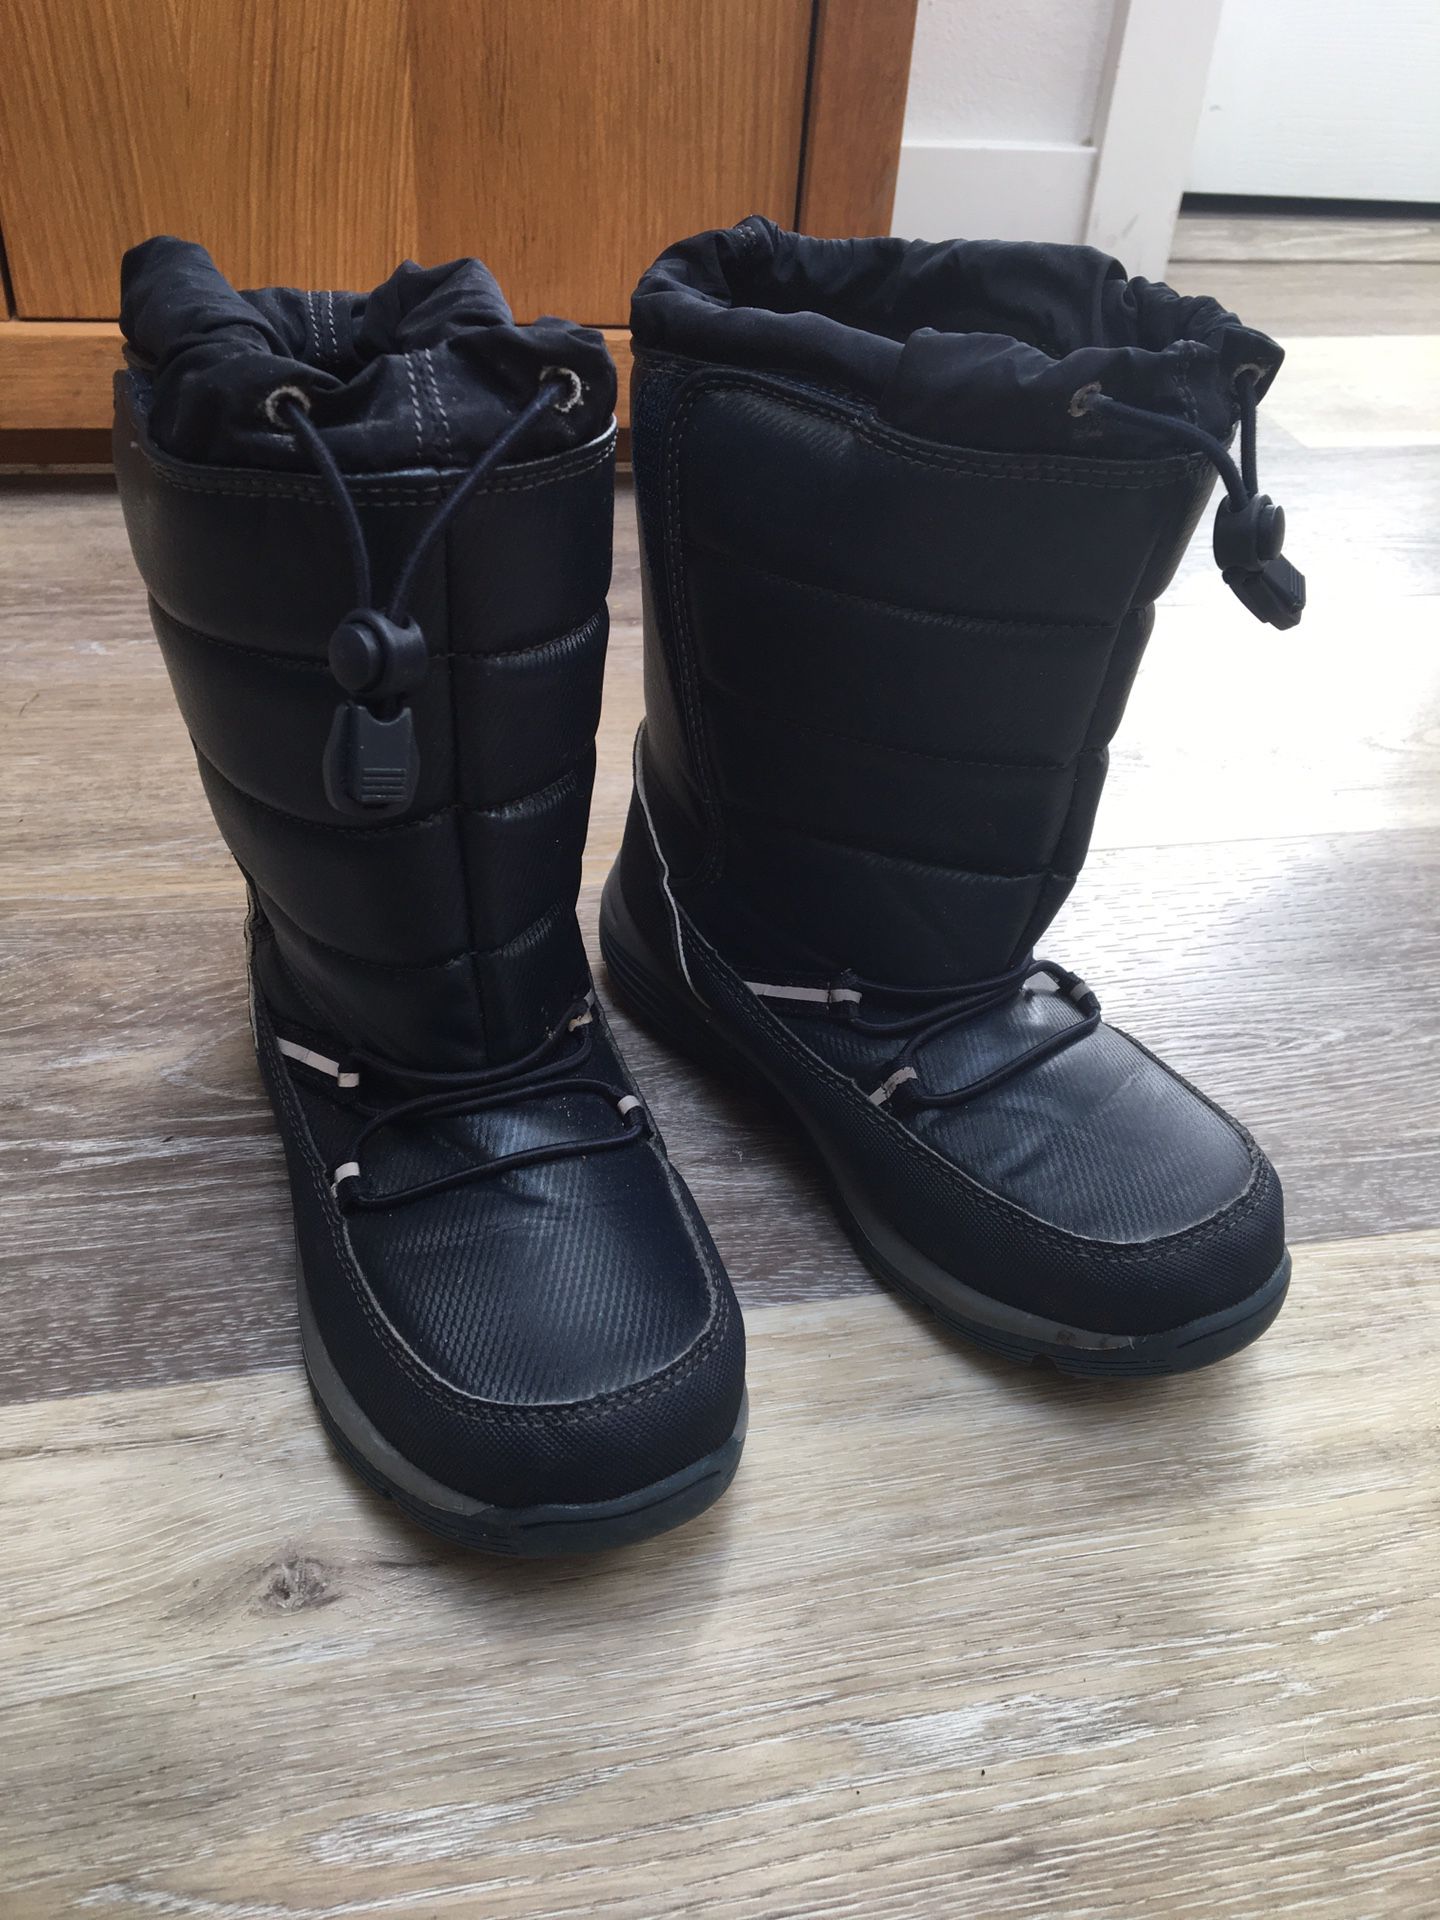 Lands’ End Kids Snow Boots And Carters Coat And Snow Bib